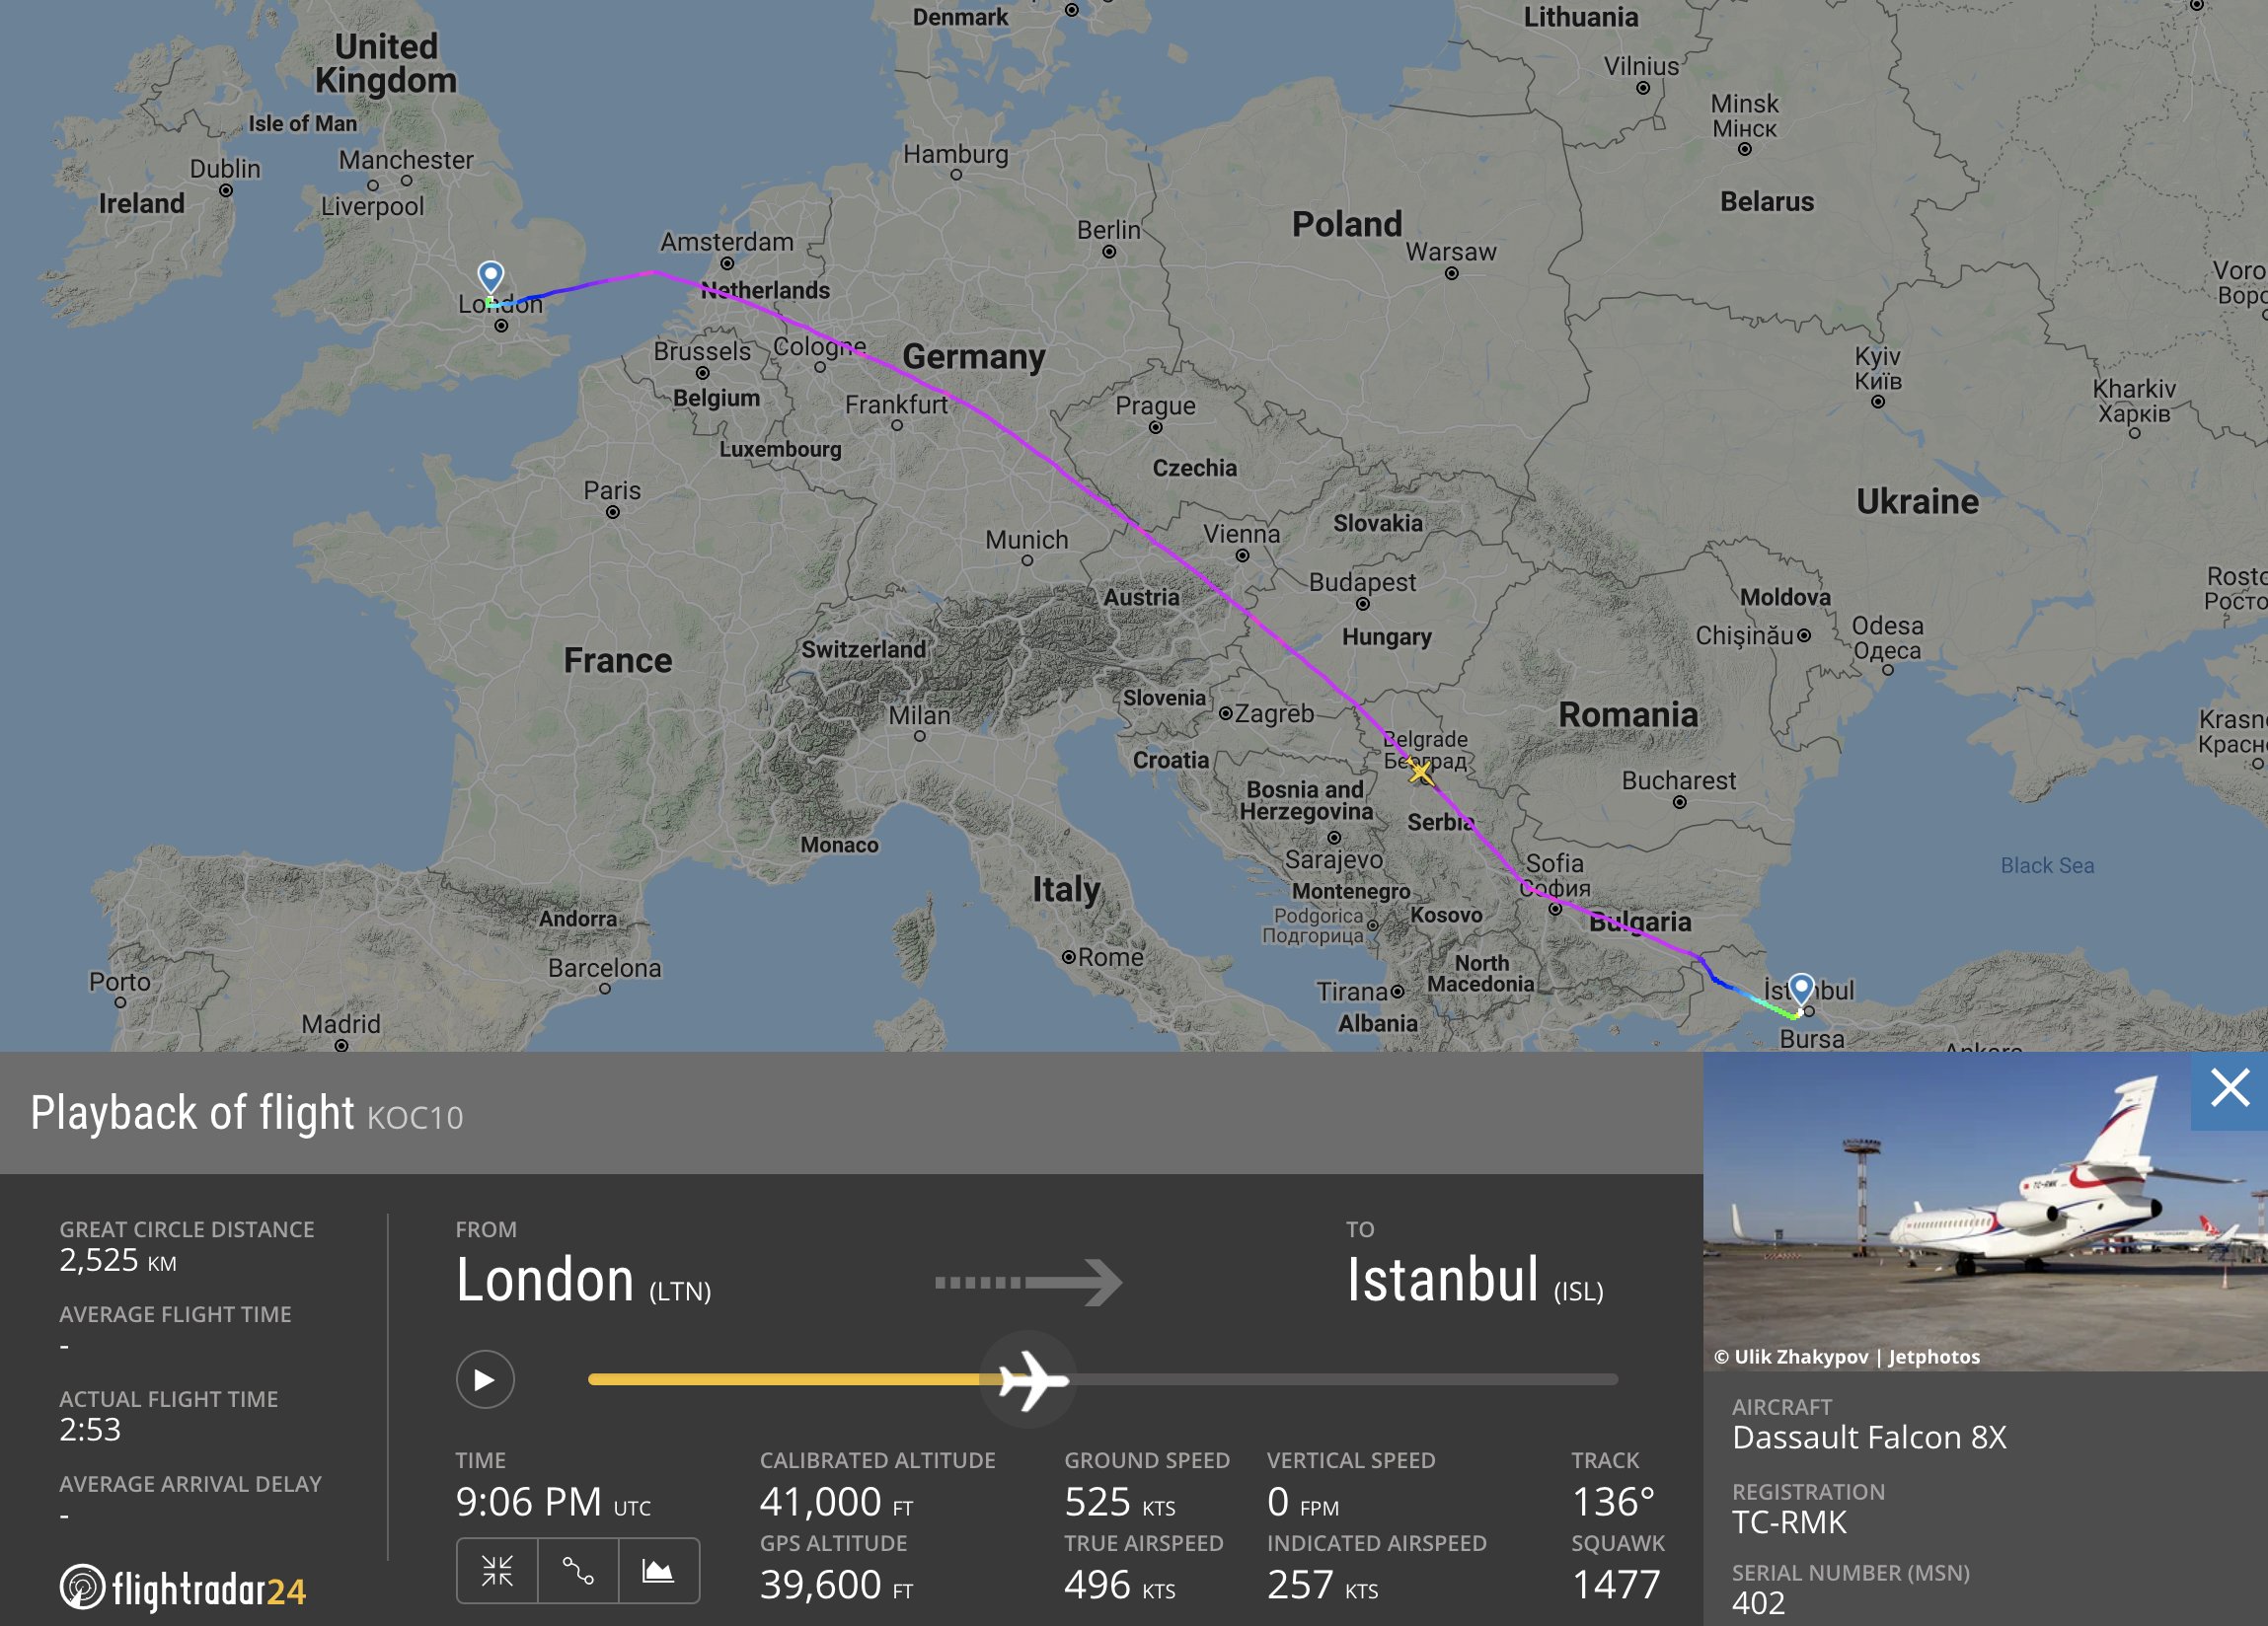 The flight path of flight KOC10 from London to Istanbul